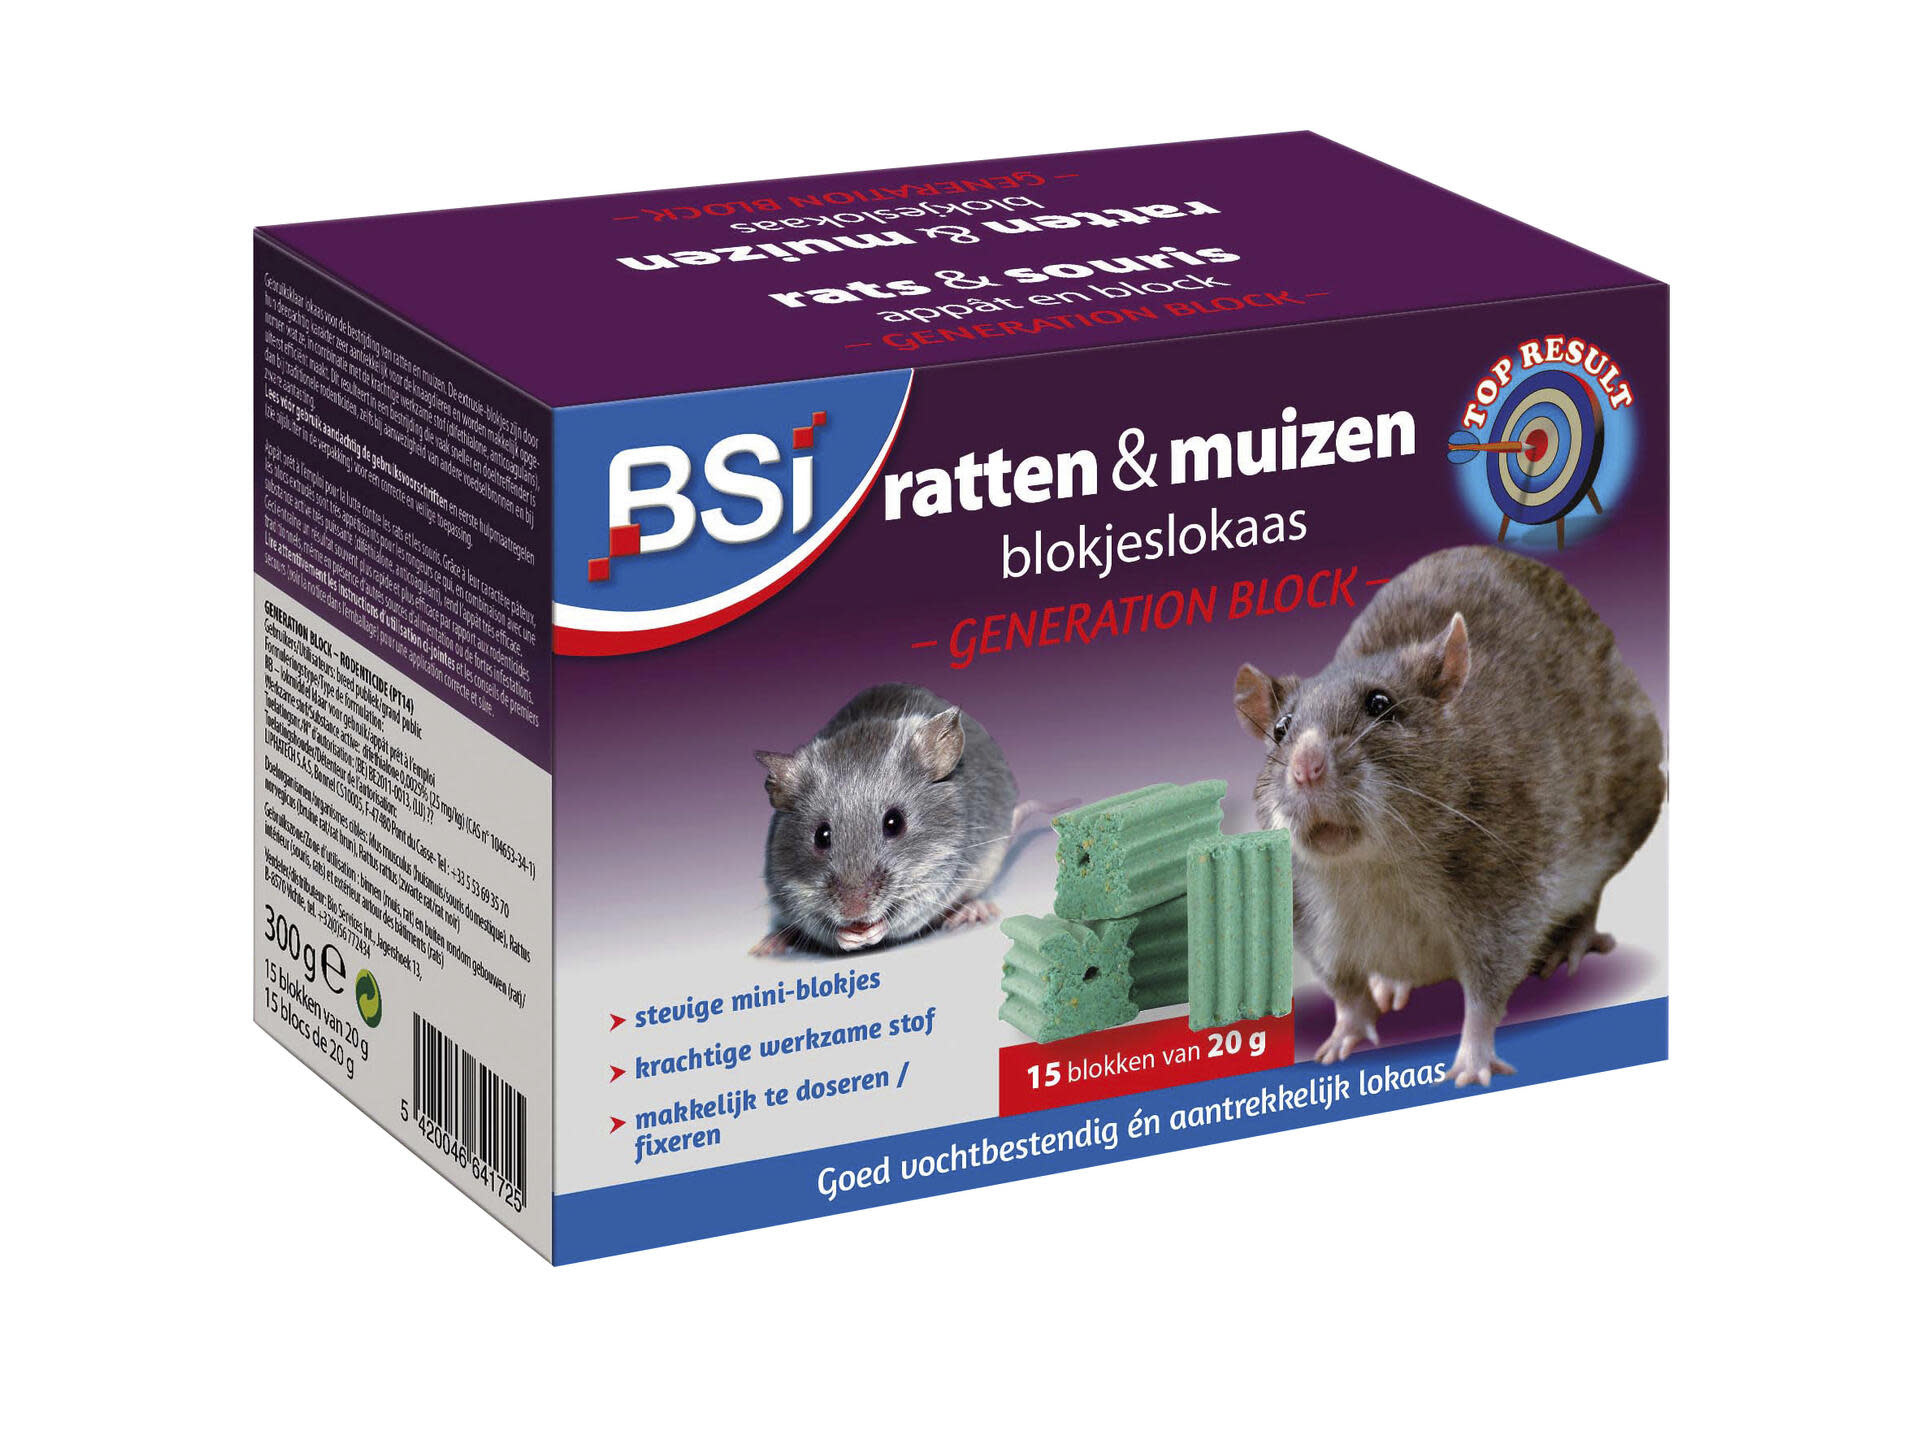 RATS GLUE 300G (NON TOXIC)  Insect & Pest Control Products